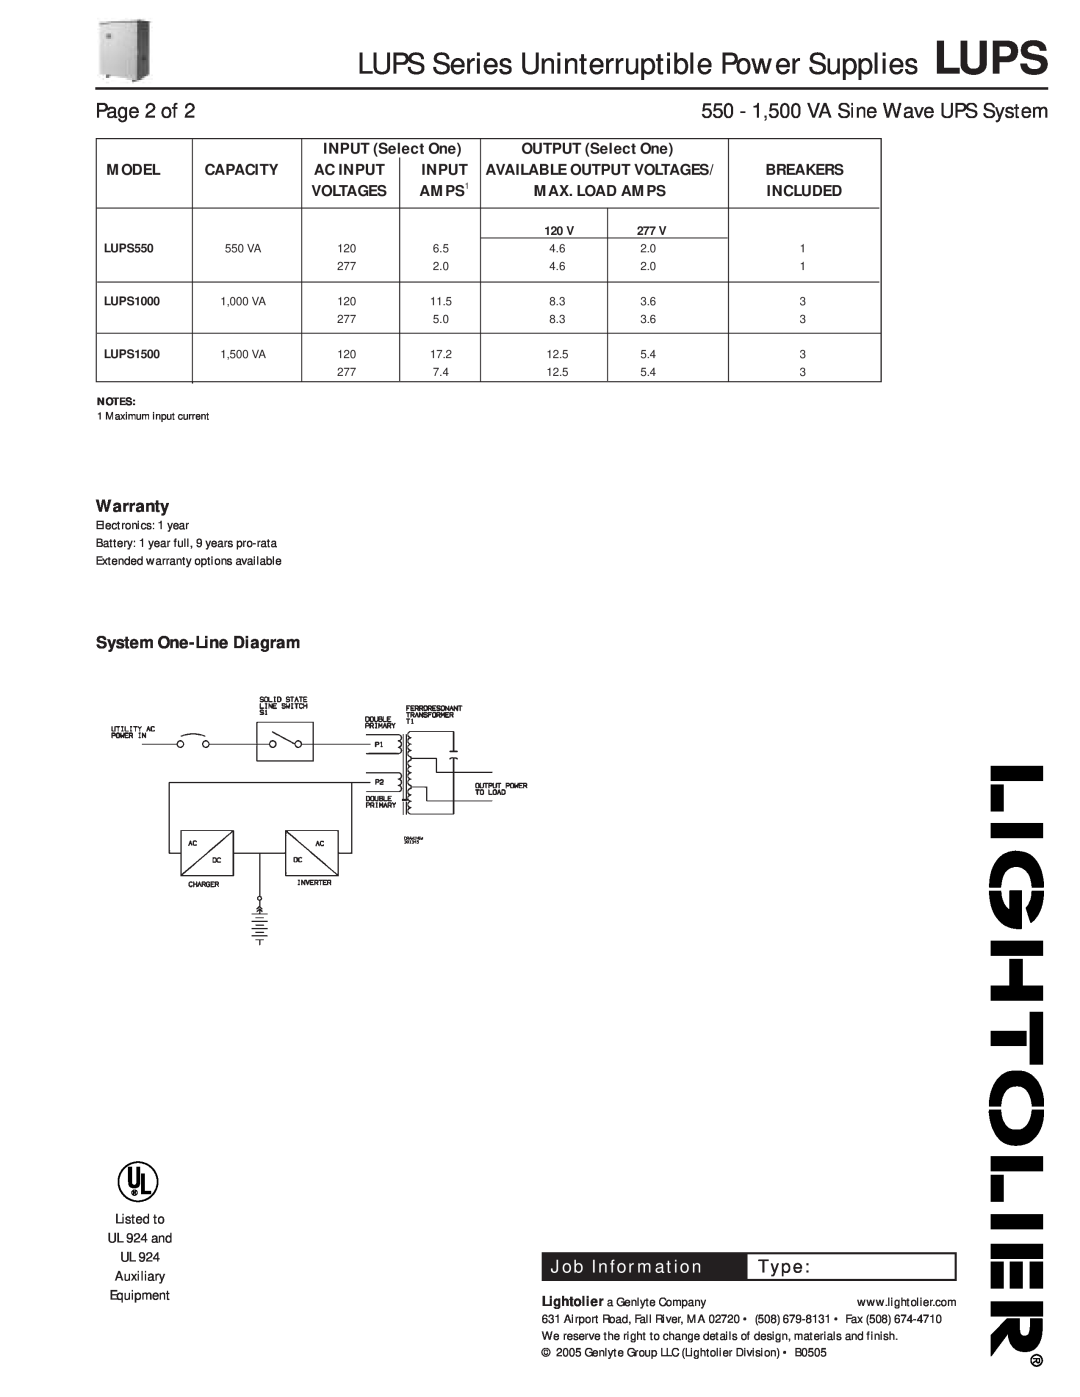 Lightolier LUPS Series Warranty, System One-Line Diagram, OUTPUT Select One, Max. Load Amps, LUPS550, LUPS1000, LUPS1500 